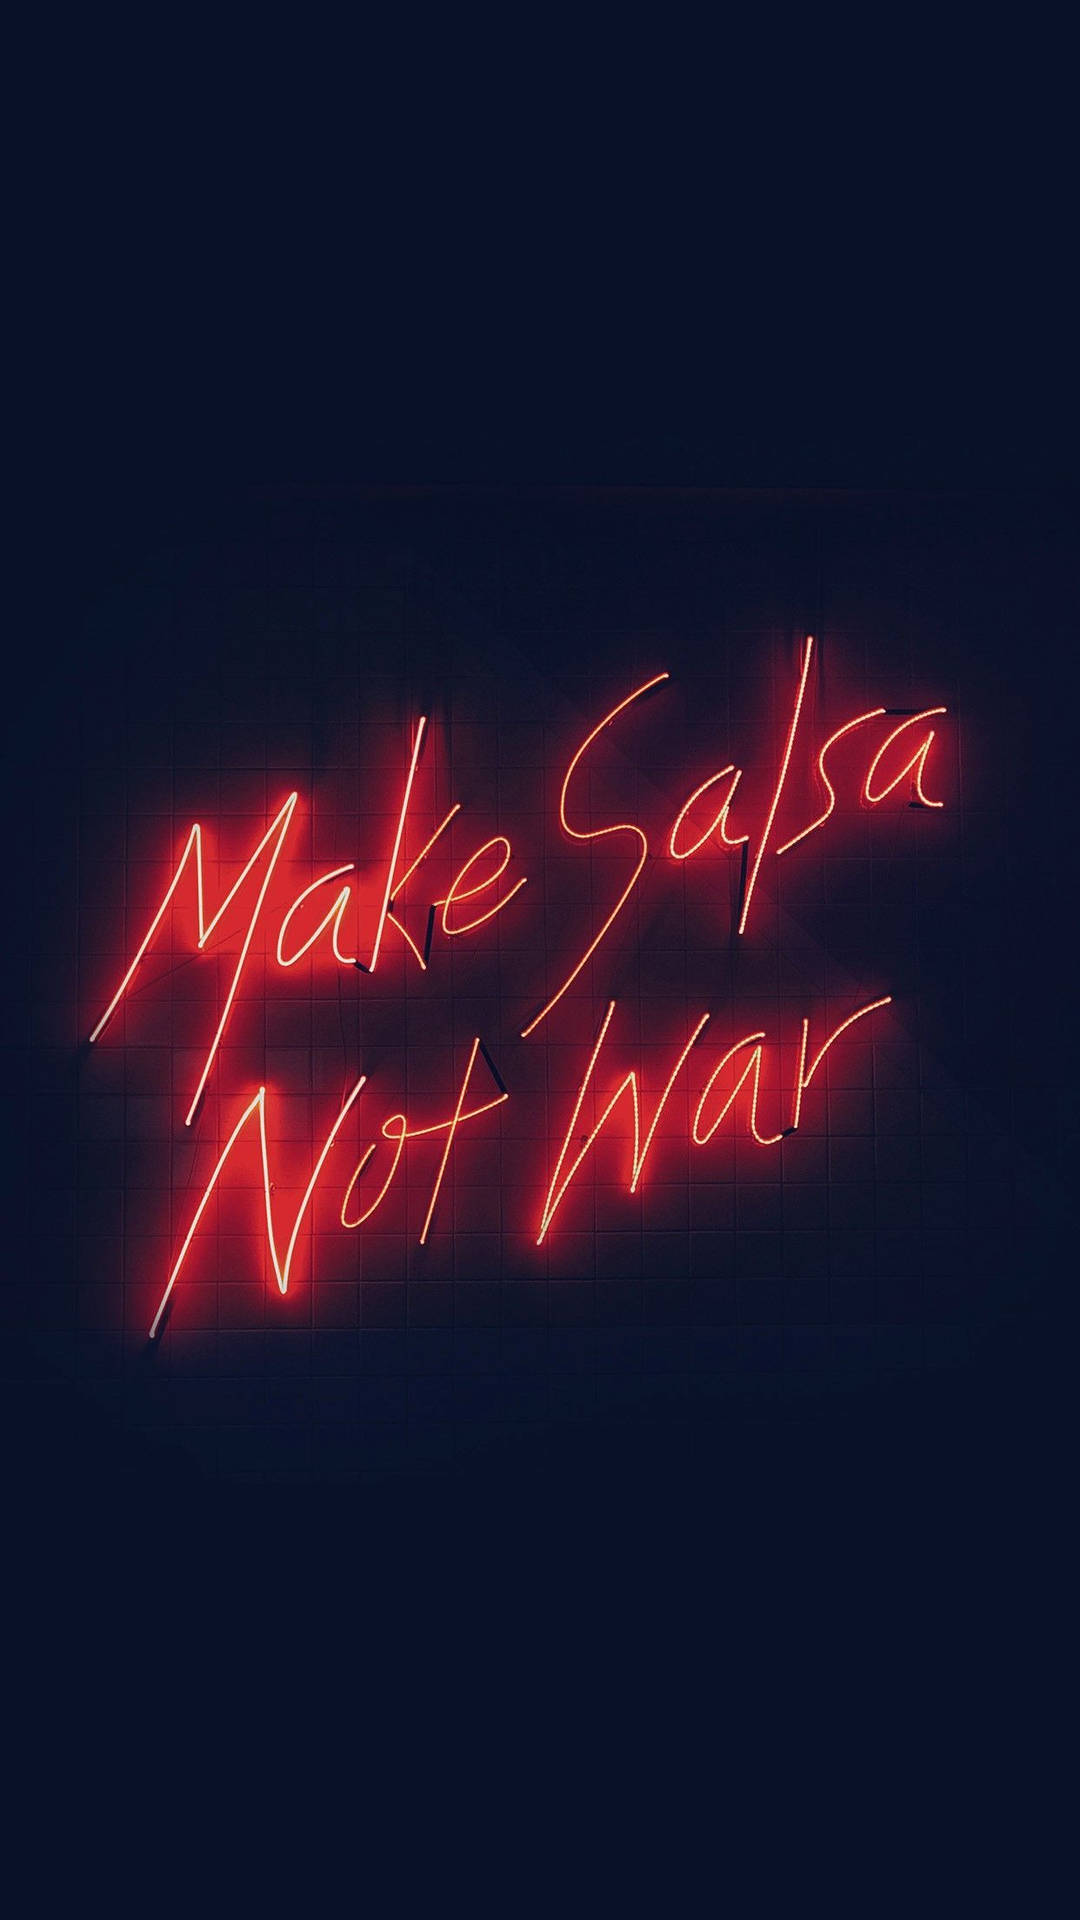 Make Salsa Not War Neon Sign Quote Iphone